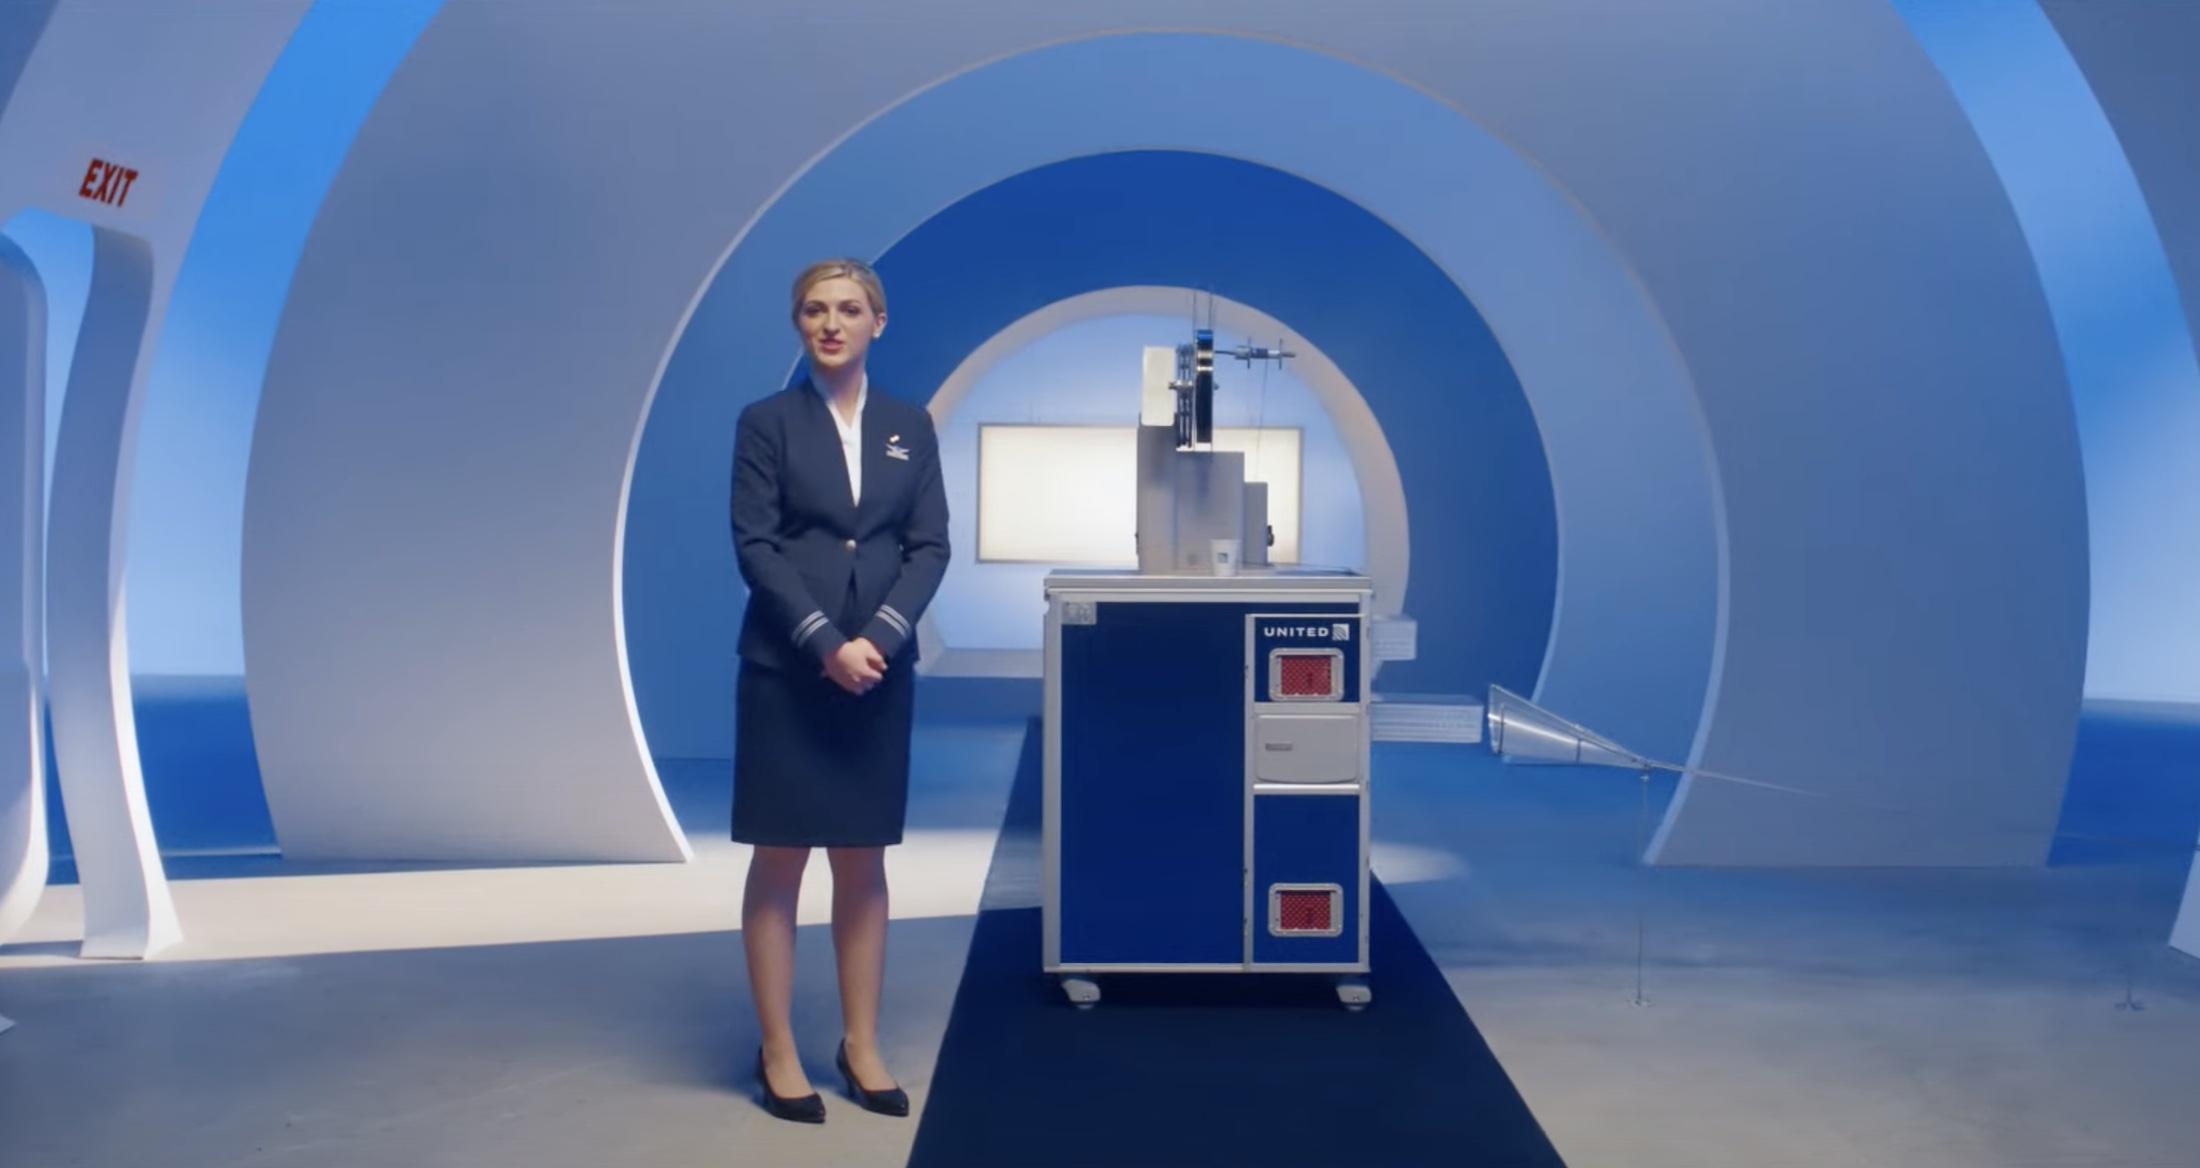 a woman standing in a room with a blue and white circle